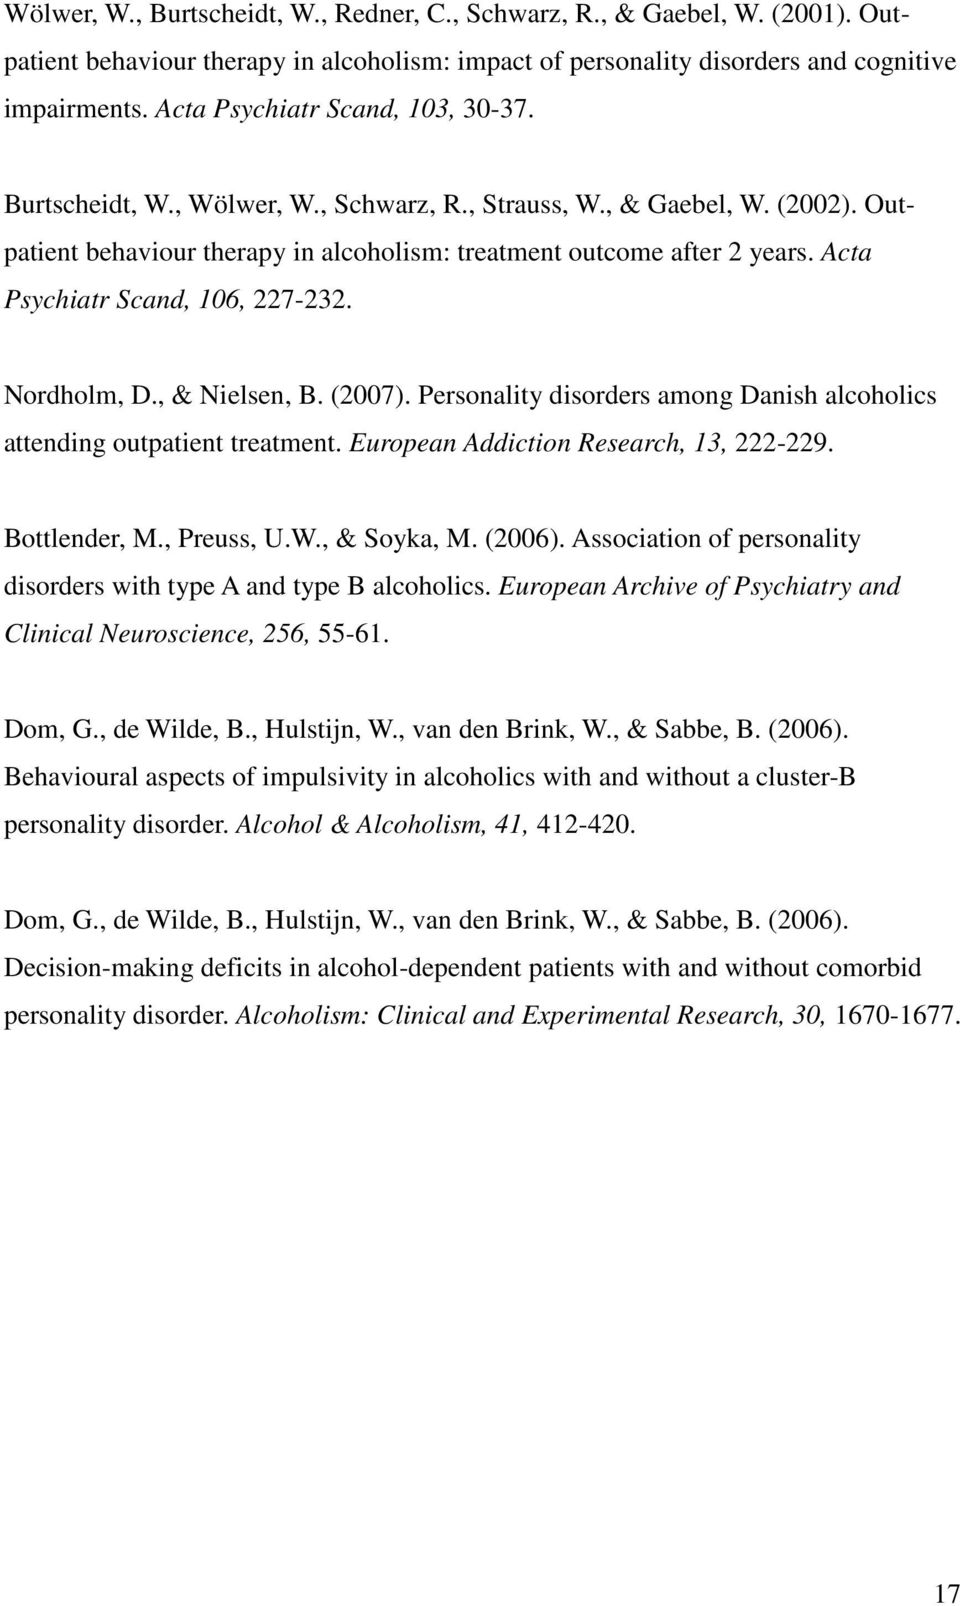 Acta Psychiatr Scand, 106, 227-232. Nordholm, D., & Nielsen, B. (2007). Personality disorders among Danish alcoholics attending outpatient treatment. European Addiction Research, 13, 222-229.